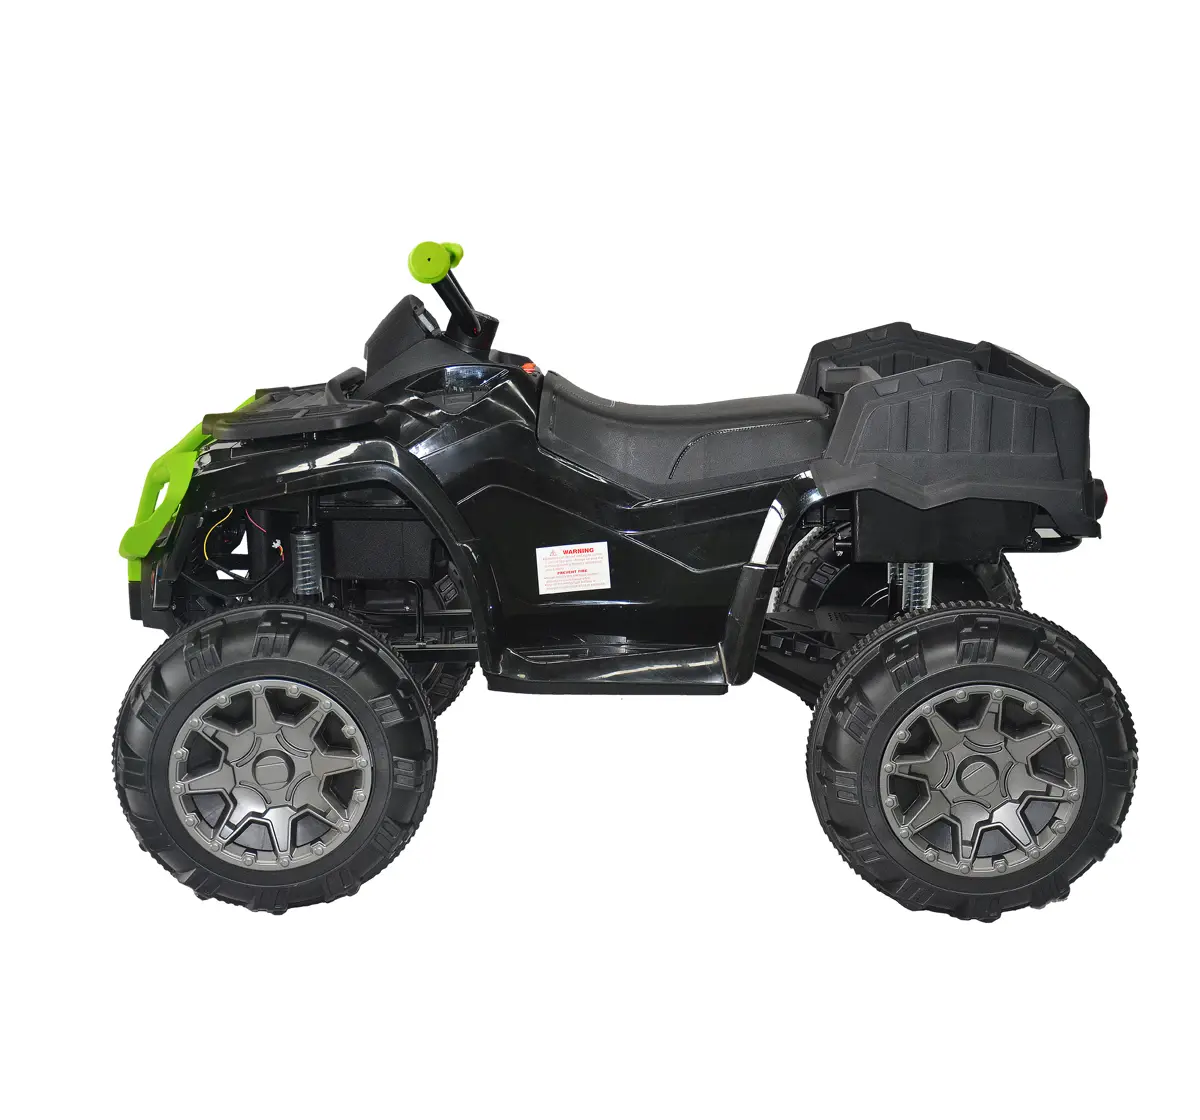 Bettyma ATV RC Buggy 2.5Ghz - Battery Operated Rideons for Kids, 3Y+, Assorted